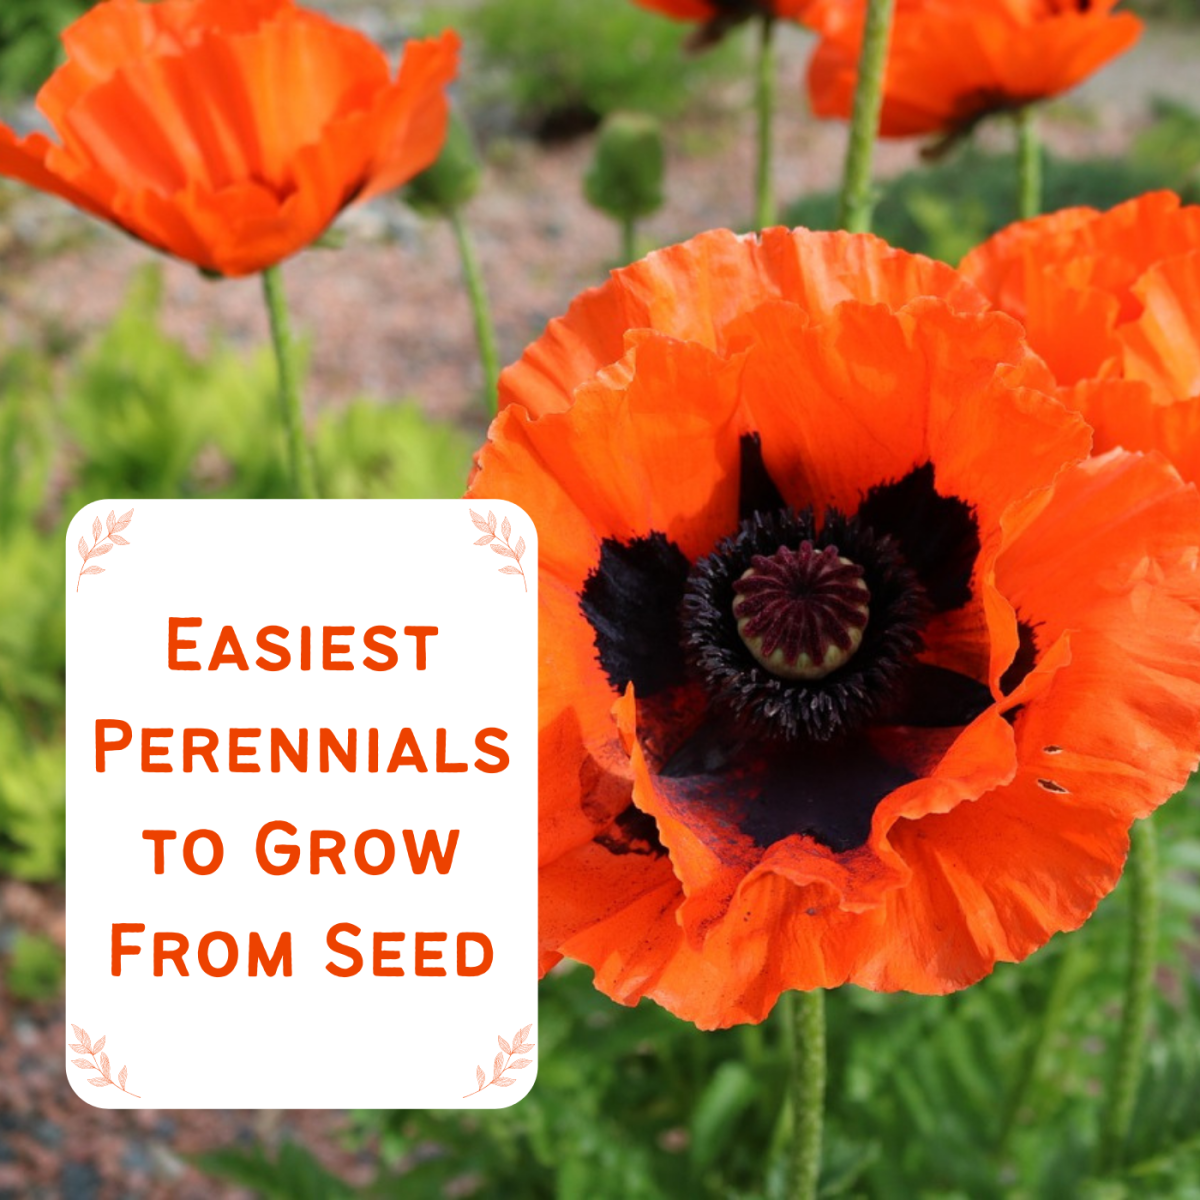 Top 10 Easy Perennial Plants to Grow From Seed